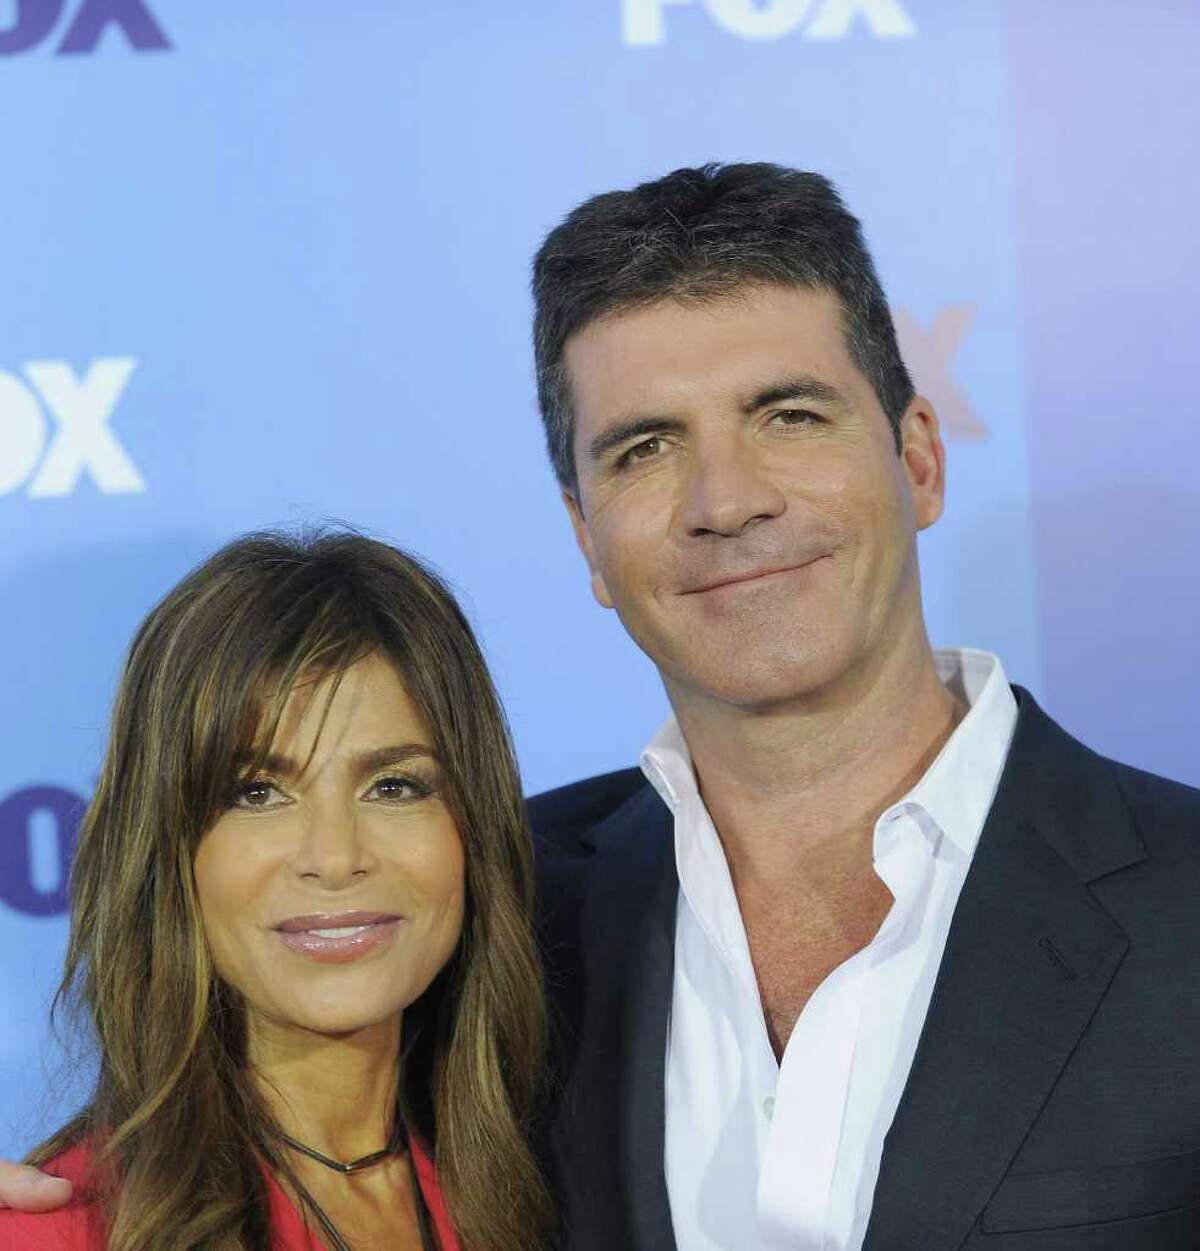 NEW YORK, NY - MAY 16: Paula Abdul and Simon Cowell attend the 2011 Fox Upfront at Wollman Rink - Central Park on May 16, 2011 in New York City.